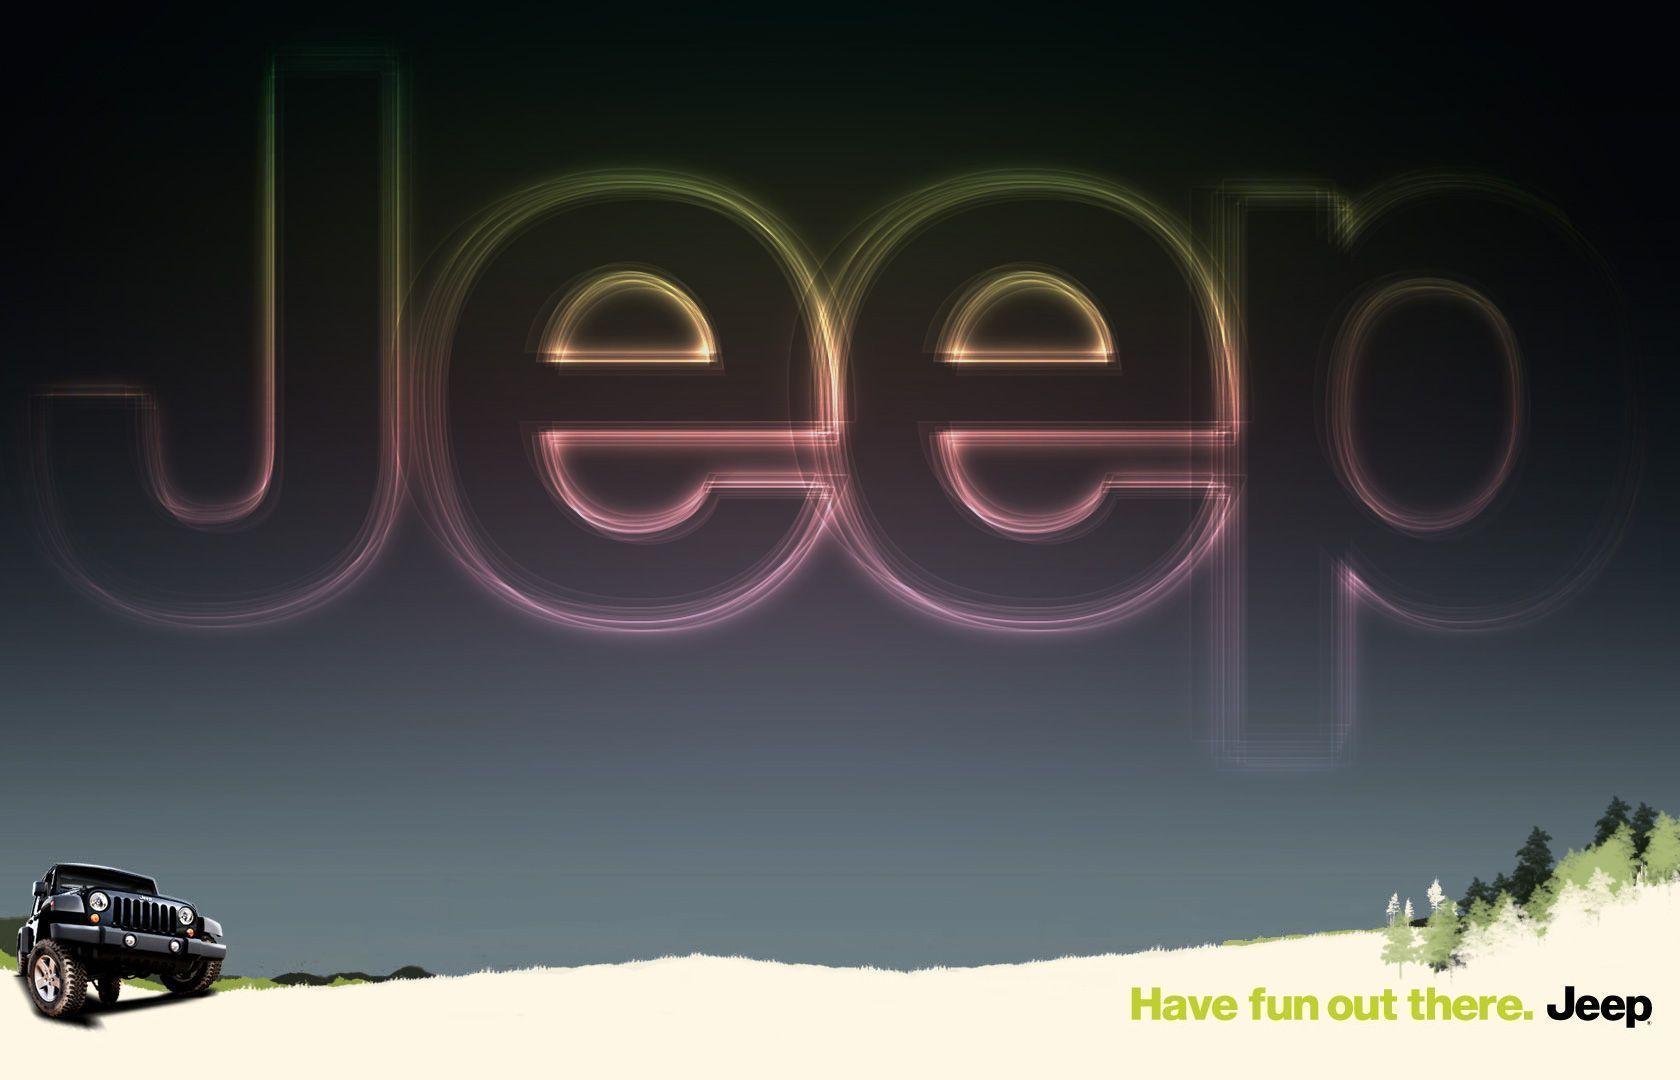 Jeep Wallpaper (Picture)